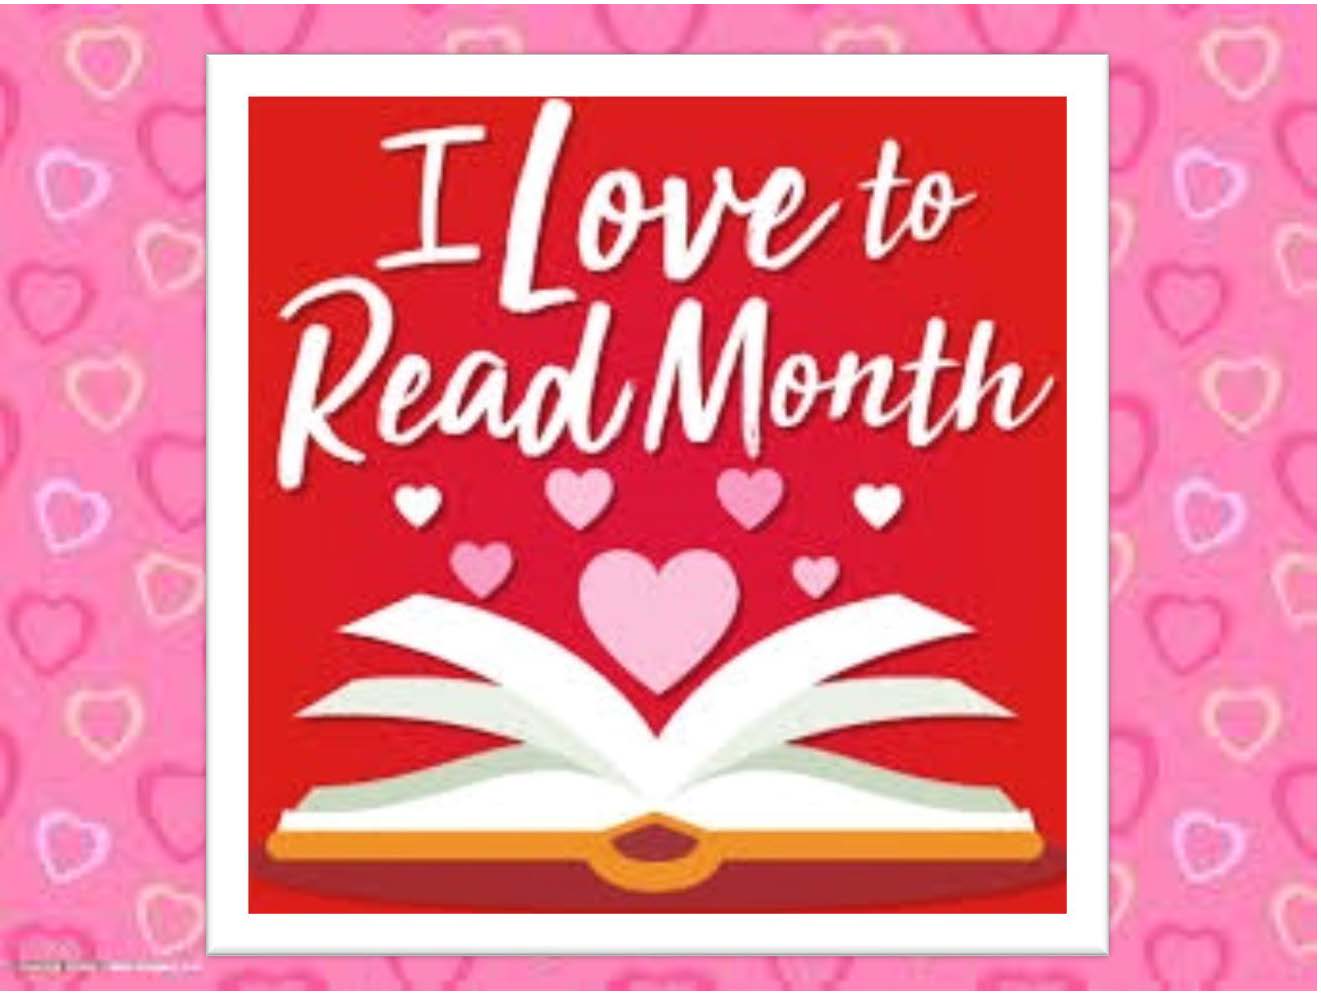 February is I Love to Read Month! École Stonewall Centennial School